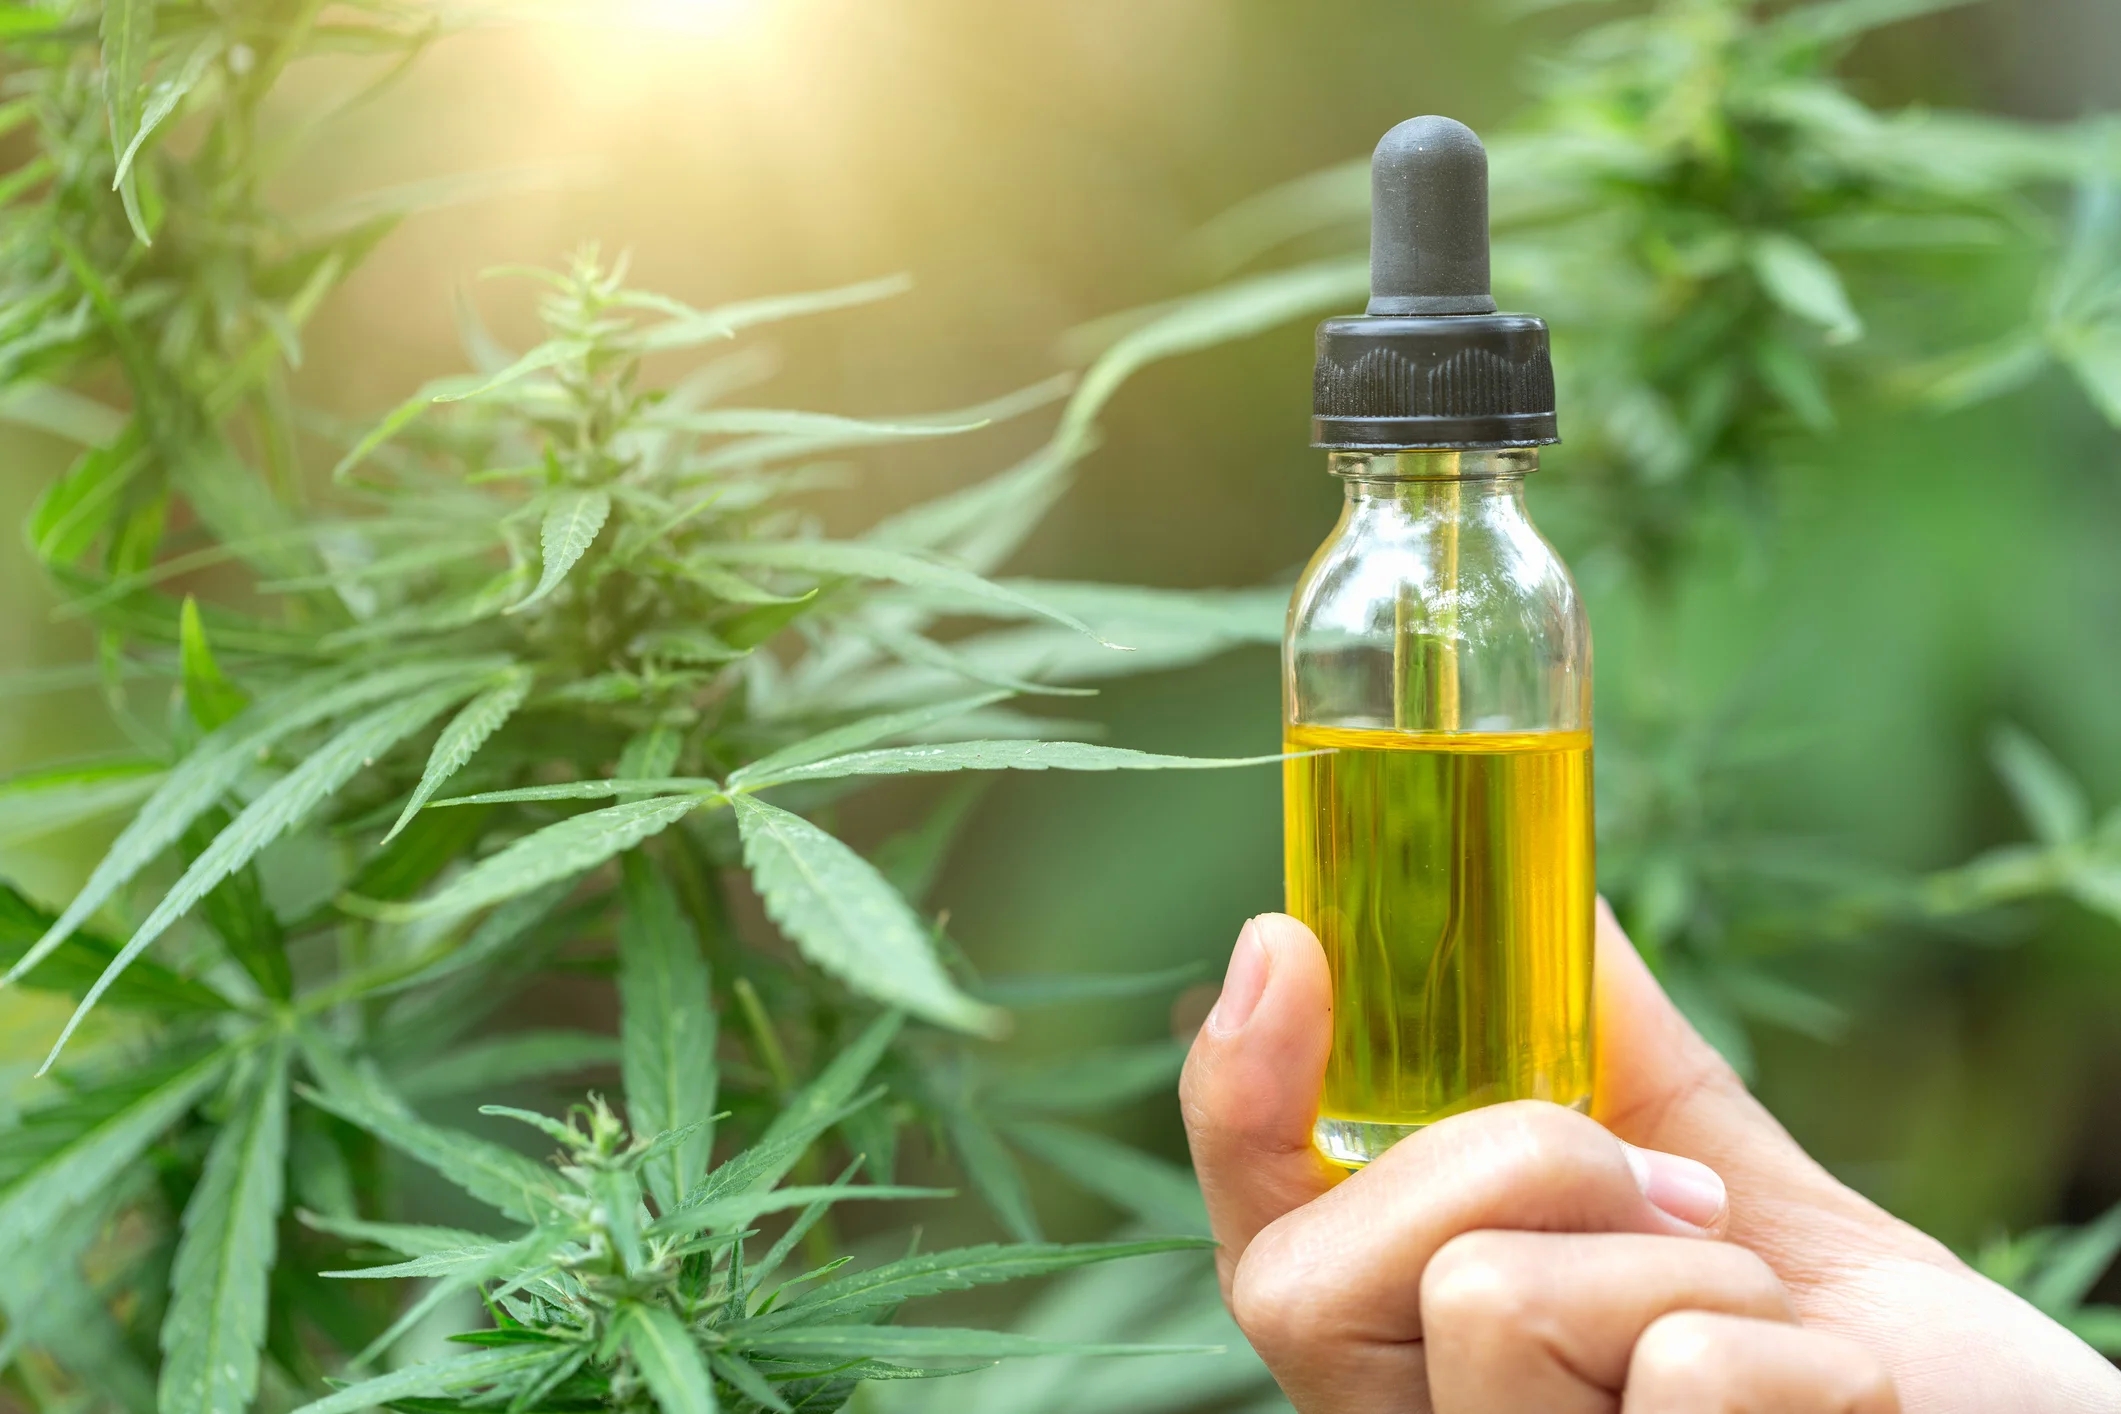 What are the basic facts about hemp oil?